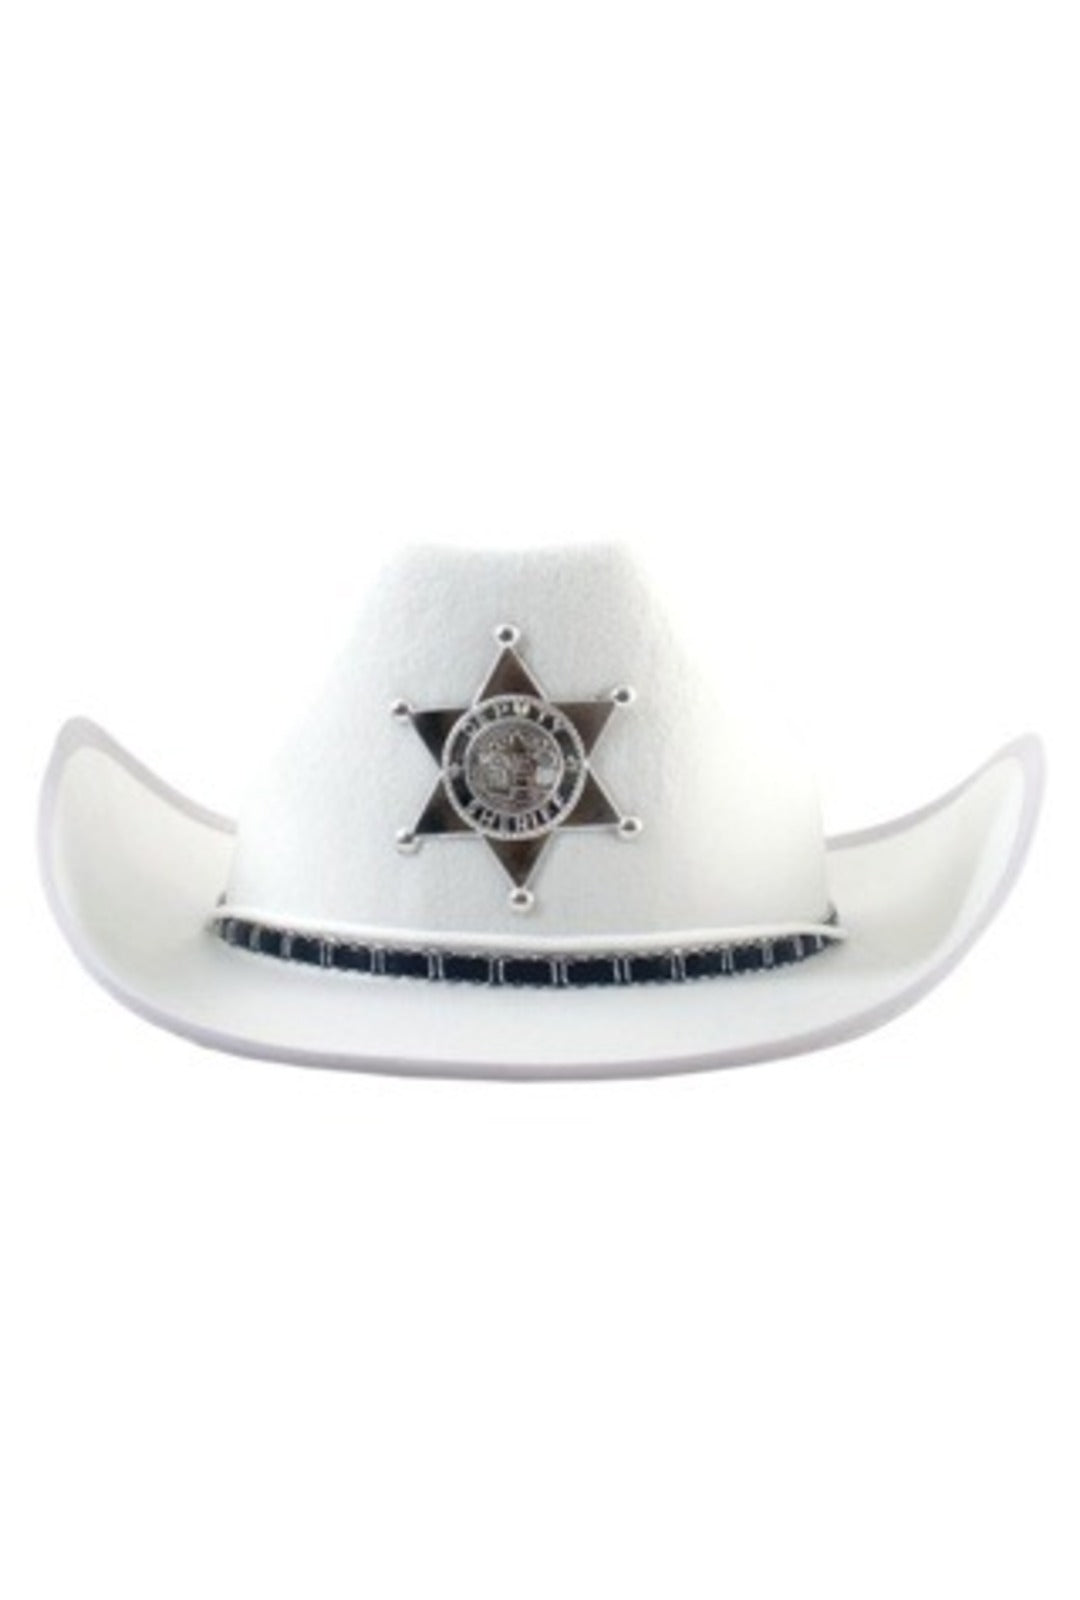 White Cowboy Hat with Woven Band & Badge